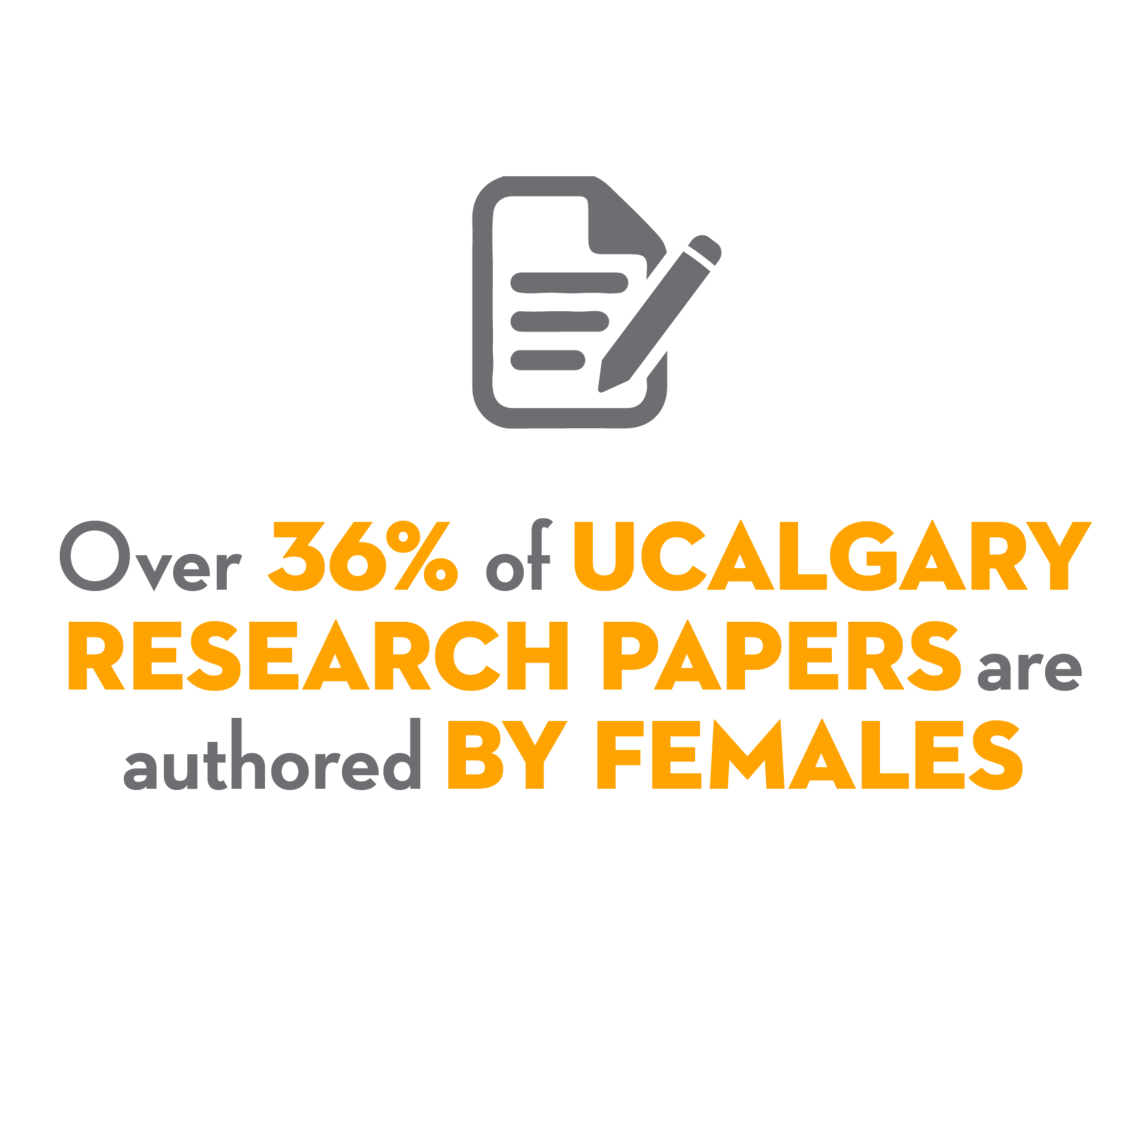 36% of UCalgary Research publications are authored by females